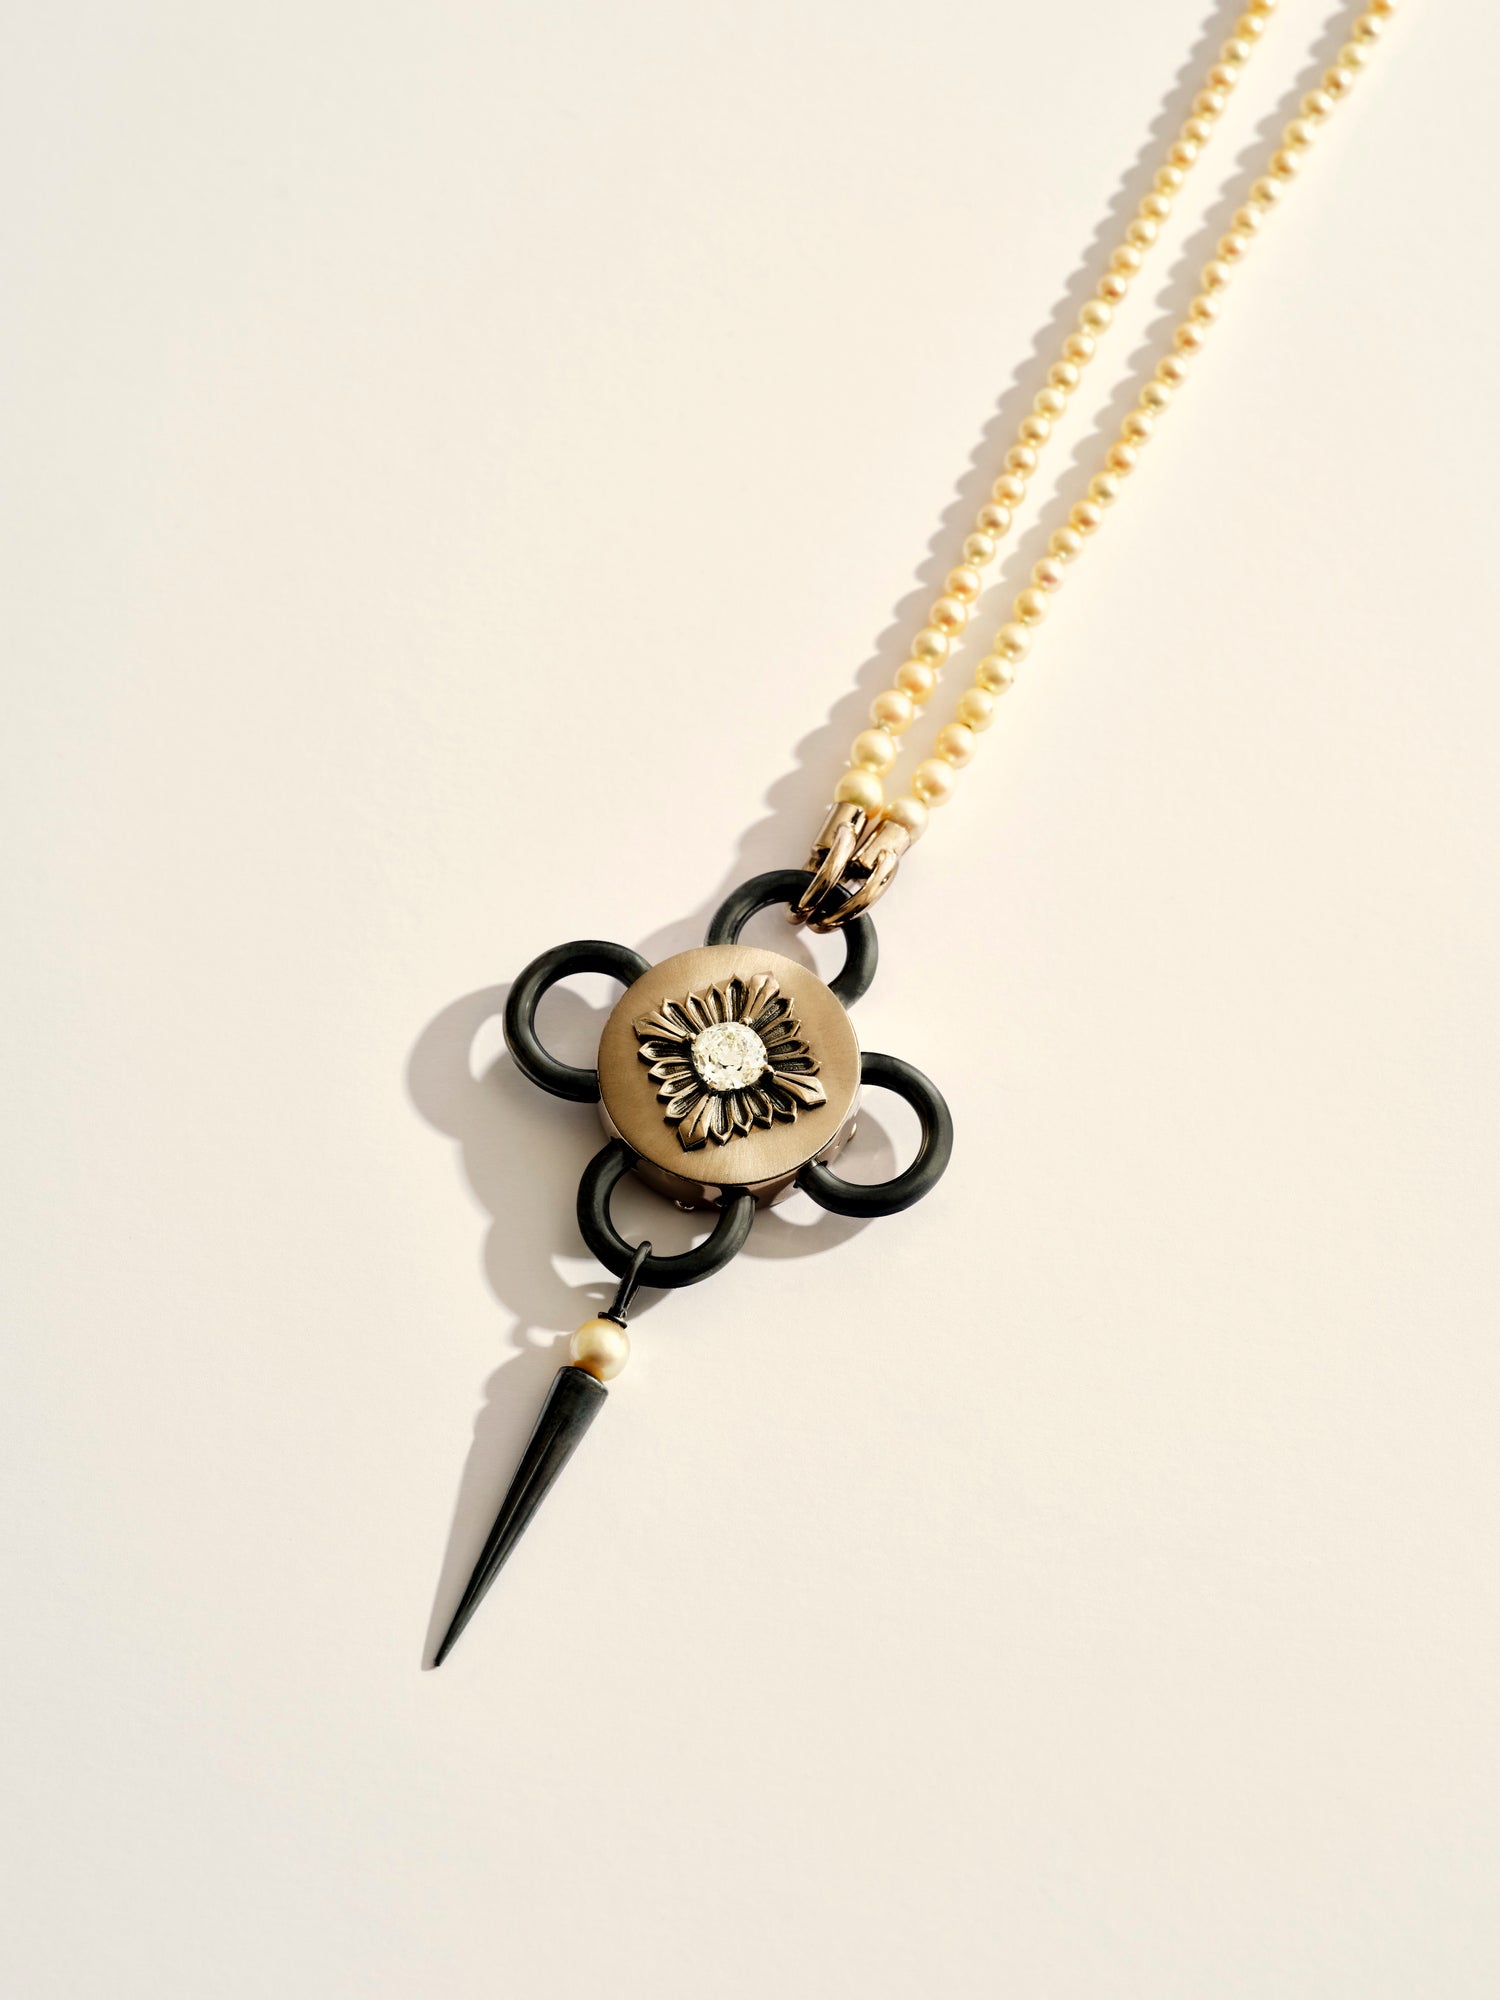 Rouvenat Bolt Black and White necklace with fine pearls on a beige background